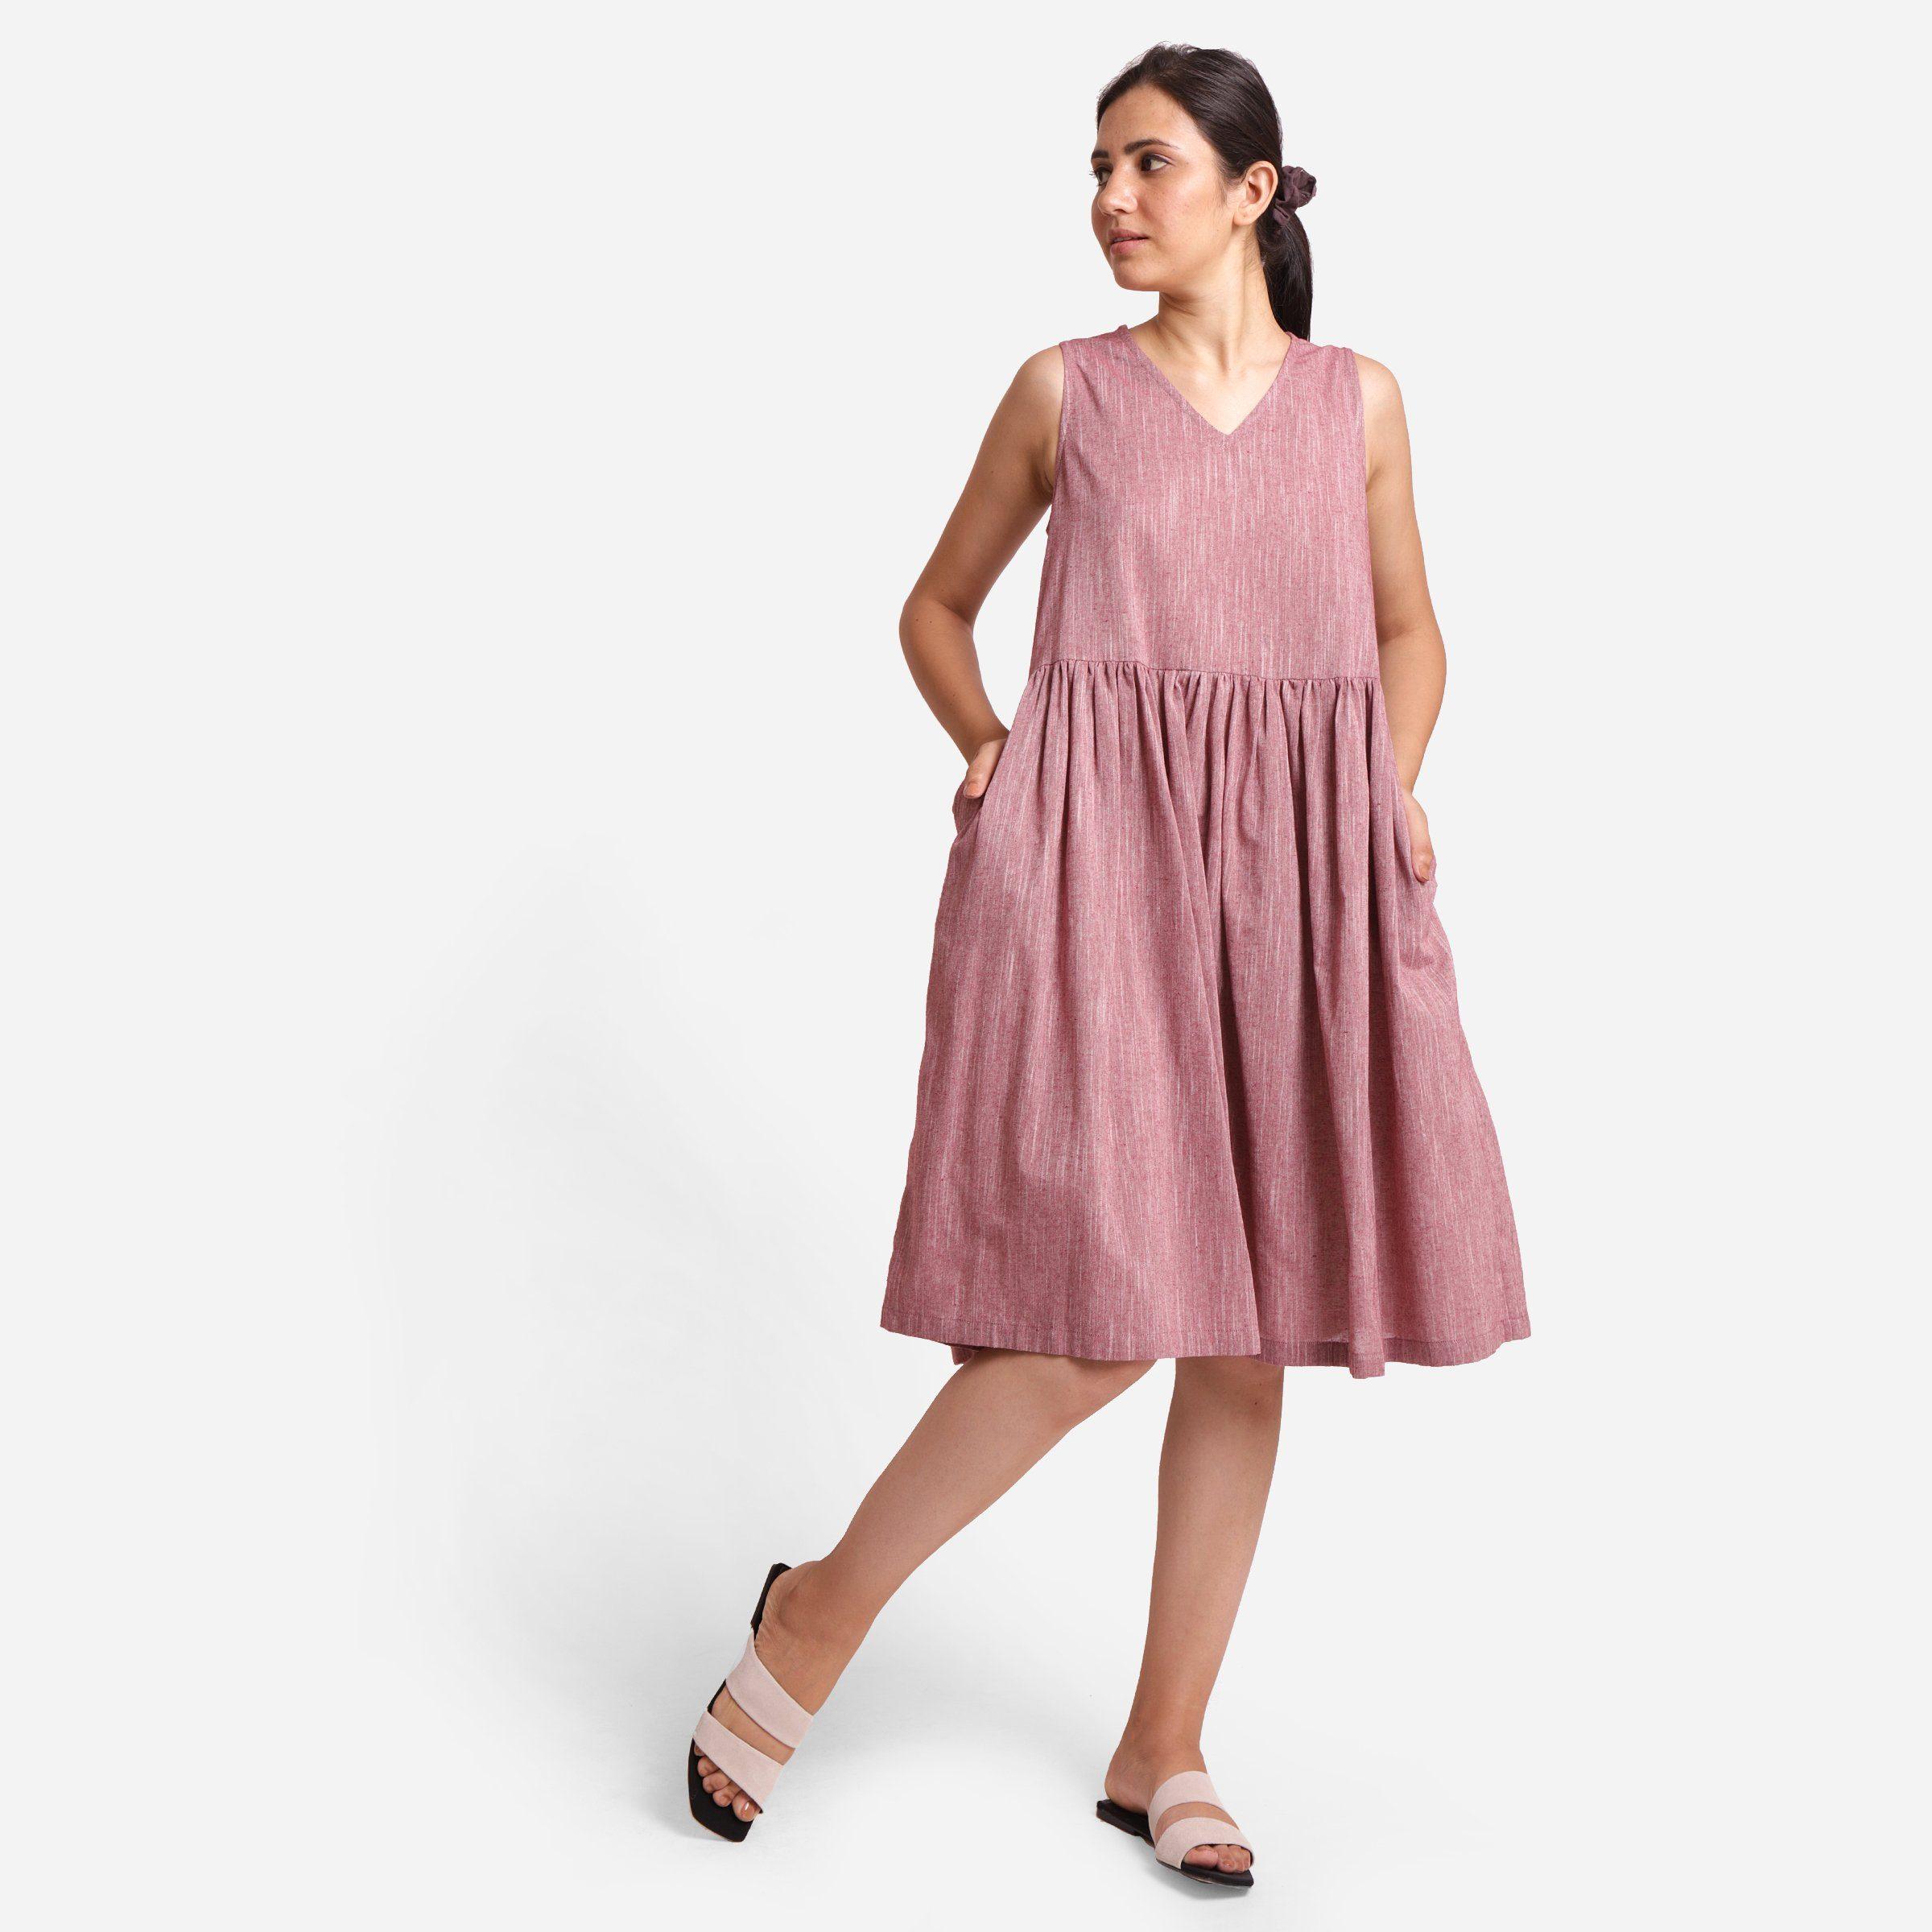 Fit & Flare Dresses for Women